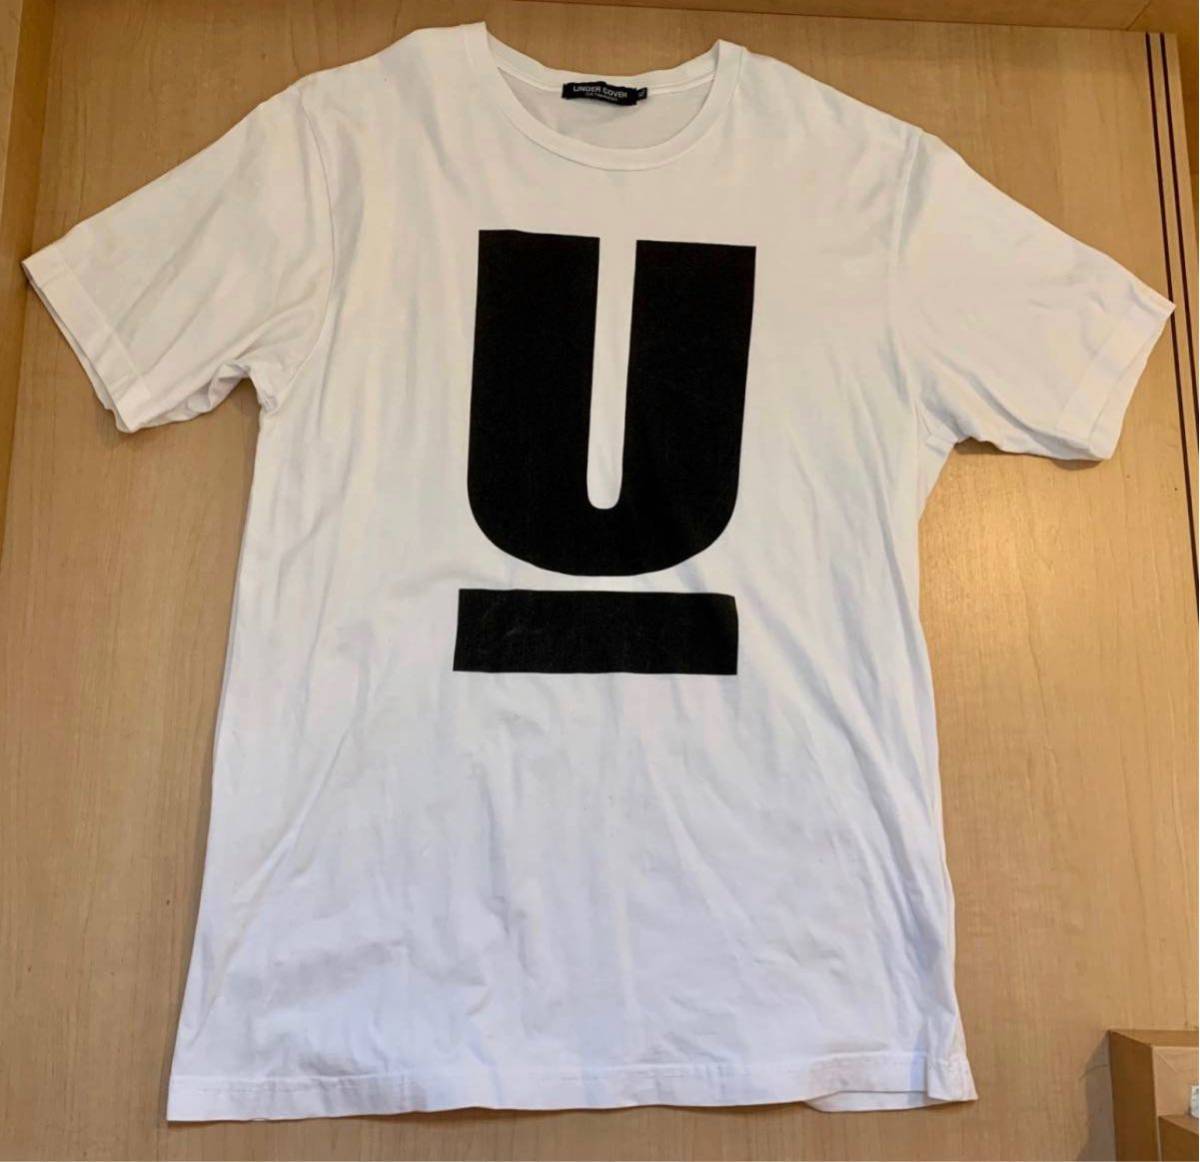 UNDER COVER Tシャツ　白ホワイト 美品　XL